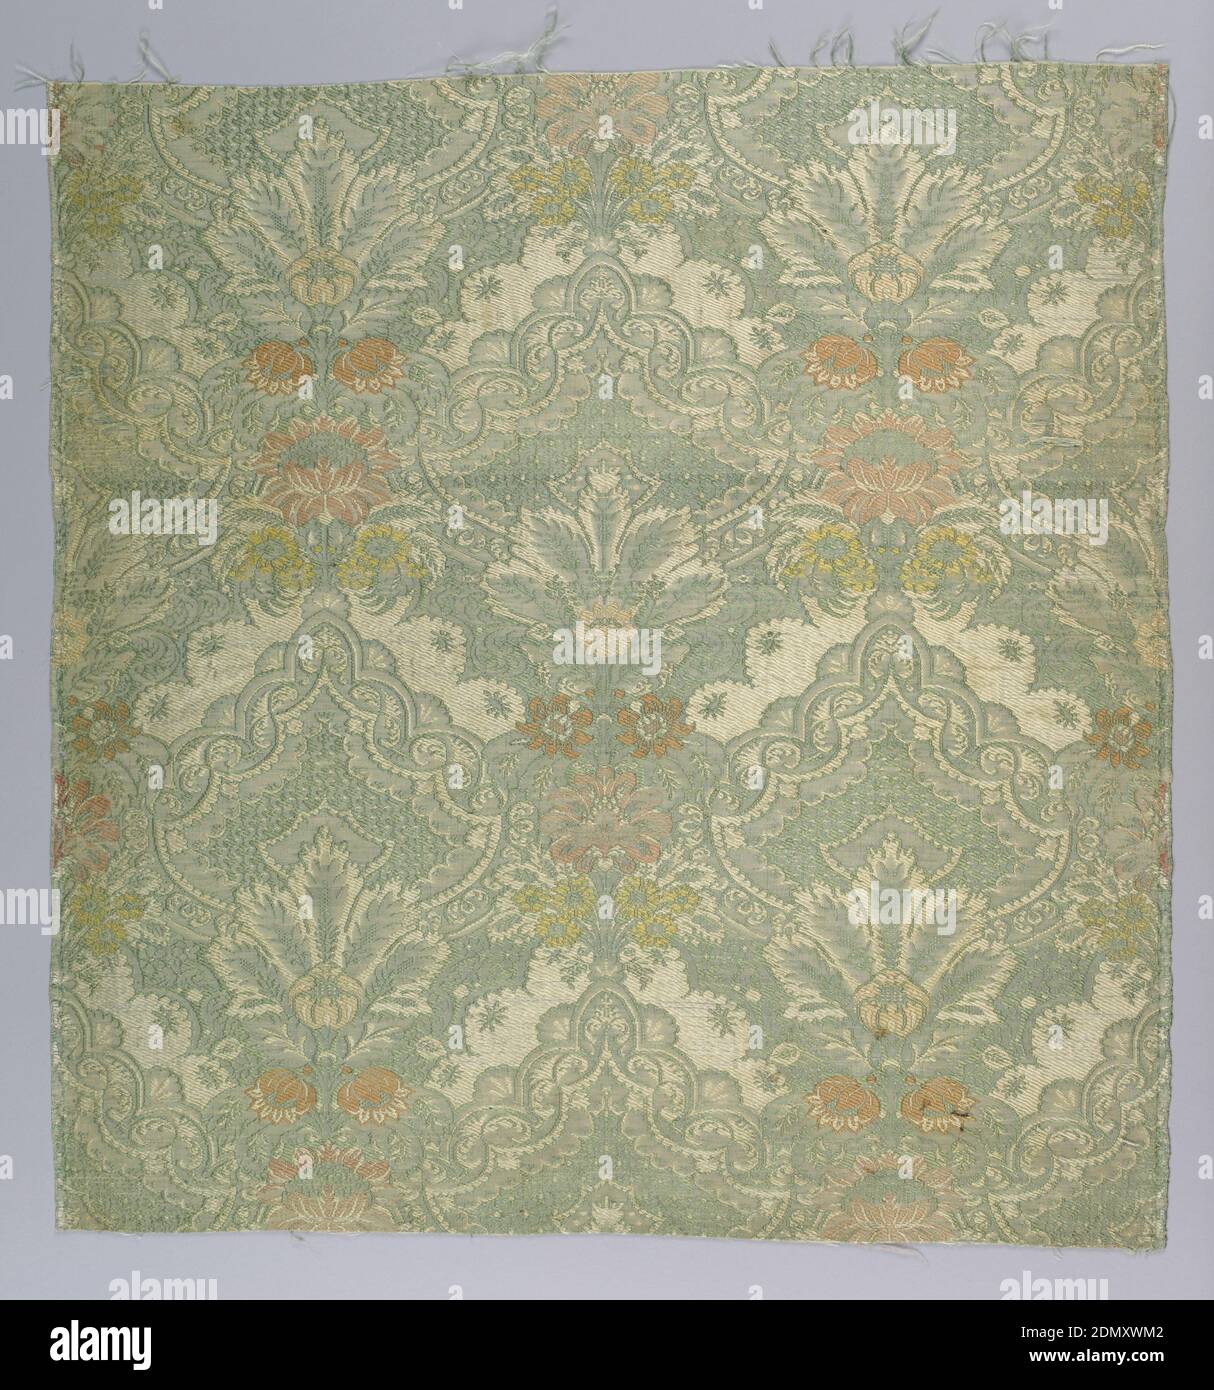 Fragment, Medium: silk Technique: compound weave with supplementary weft patterning (brocade), Silk fragment showing detailed pattern in silvery shades of green and off-white with touches of salmon pink and yellow. Design has a symmetrical motif in two variants with a vertical bunch of flowers surmounted by fanning leaves surmounted by decorated pear-shaped cartouche with diaper filling, in a close-set medium sale diagonal repeat giving allover effect., France, early 18th century, woven textiles, Fragment Stock Photo